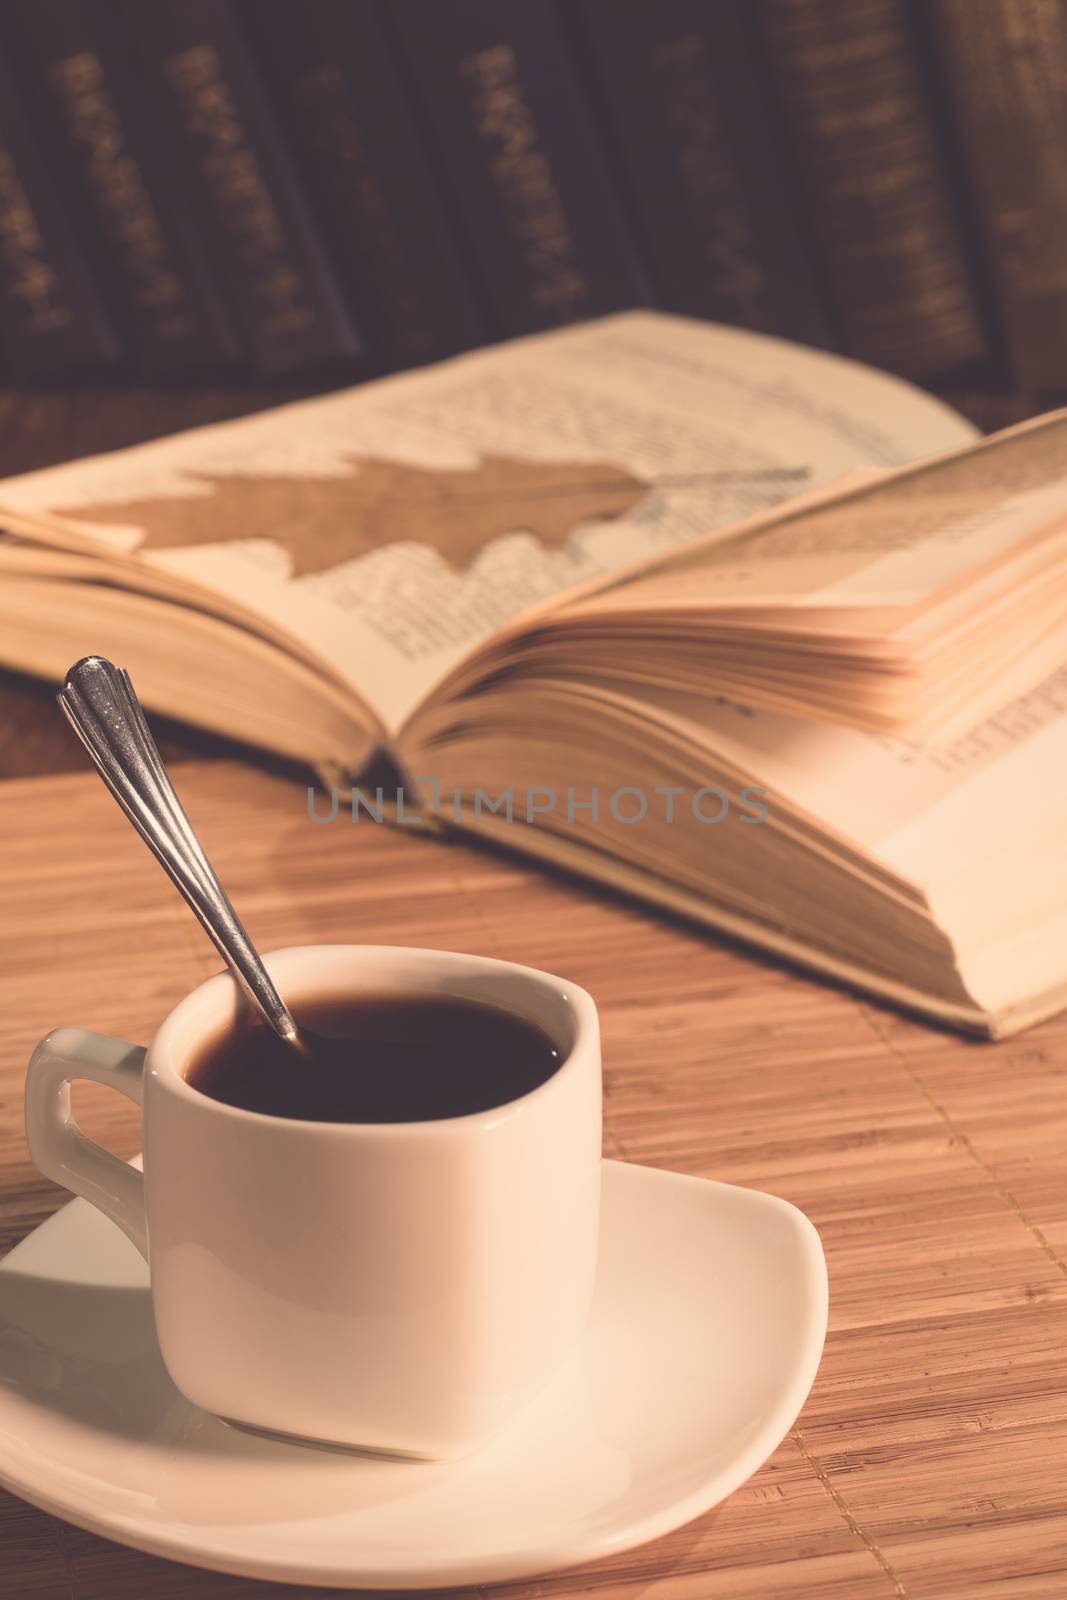 An open book and a cup of coffee on the table. Dry oak leaf in an open book. A cup of coffee in the evening light.